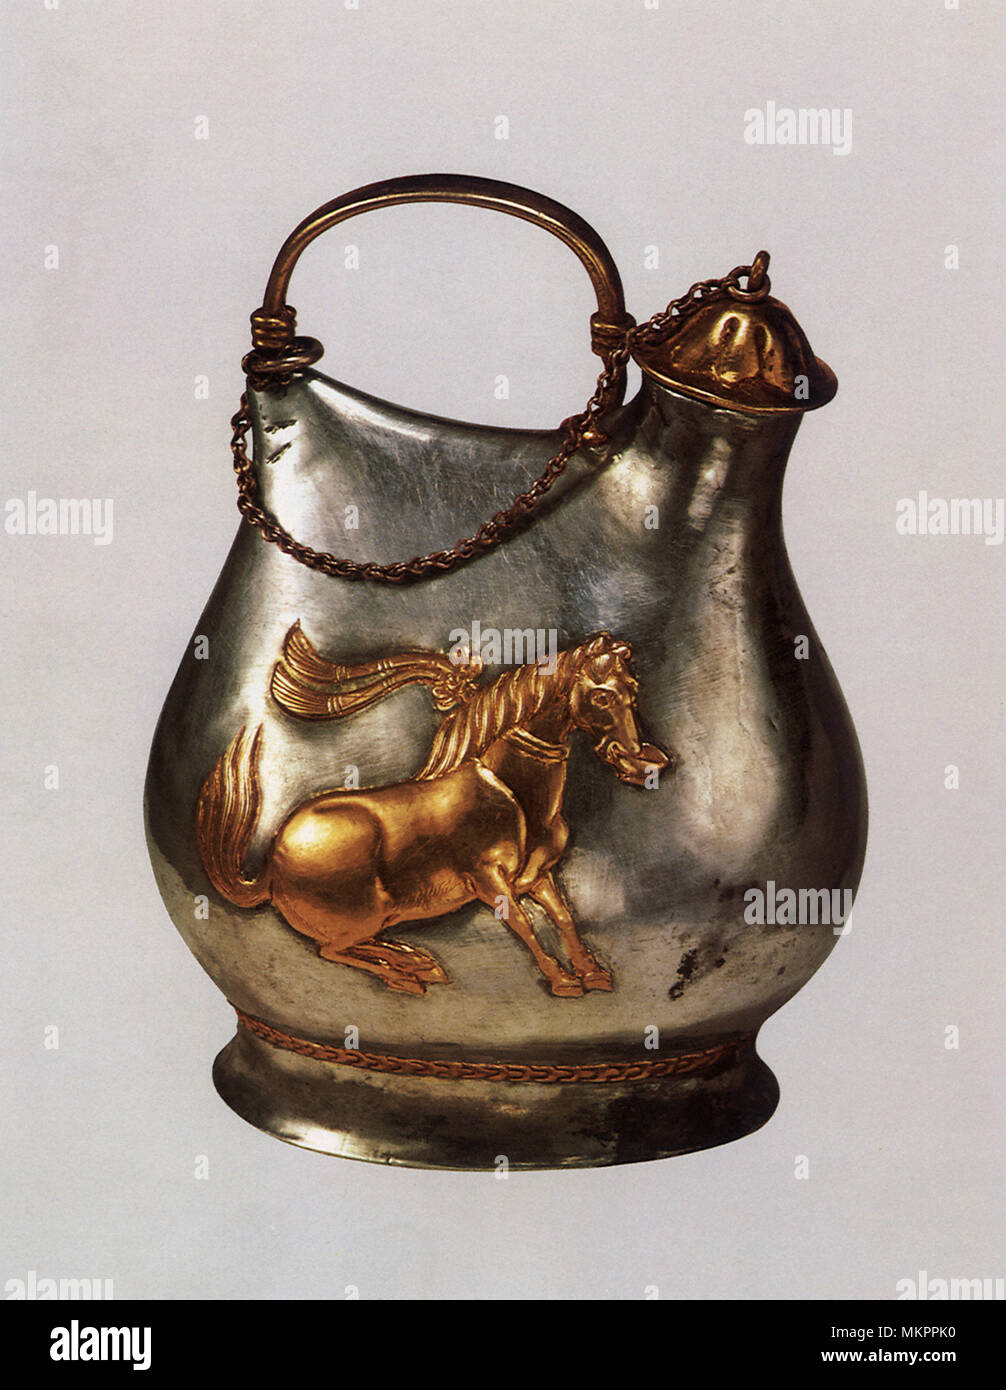 Pitcher in Gold-Plated Silver with a Figure of a Horse Stock Photo